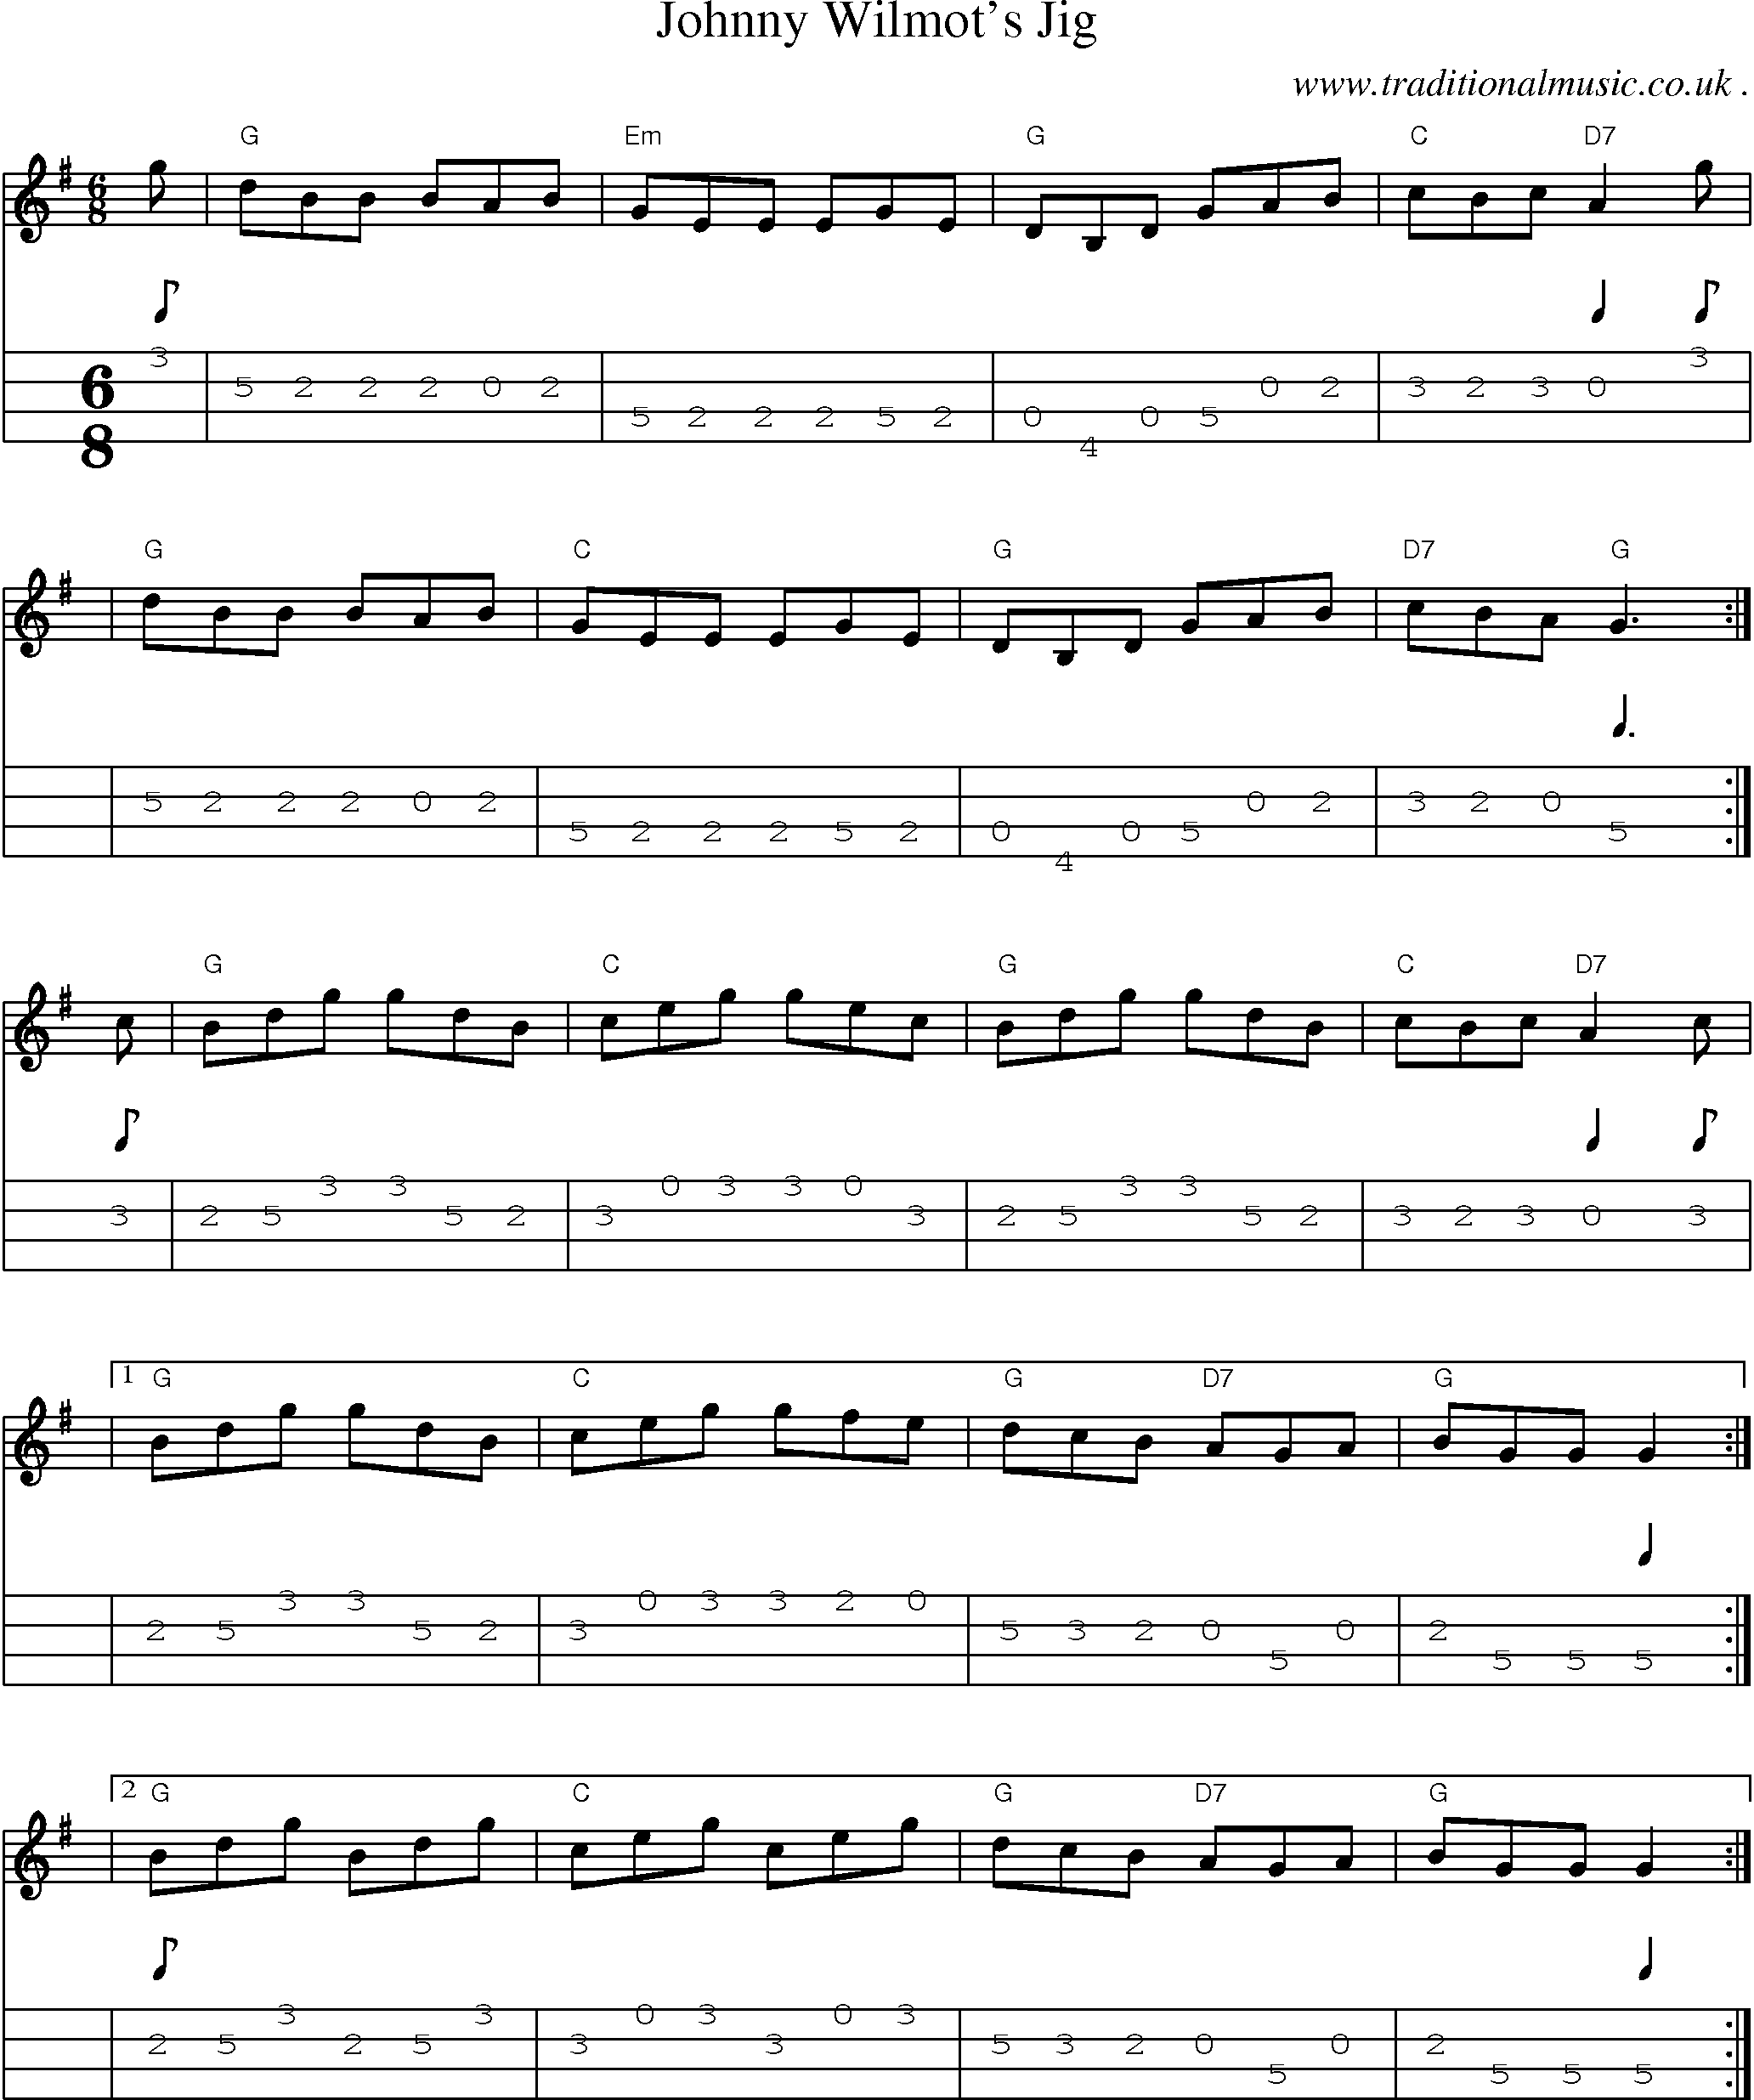 Sheet-music  score, Chords and Mandolin Tabs for Johnny Wilmots Jig